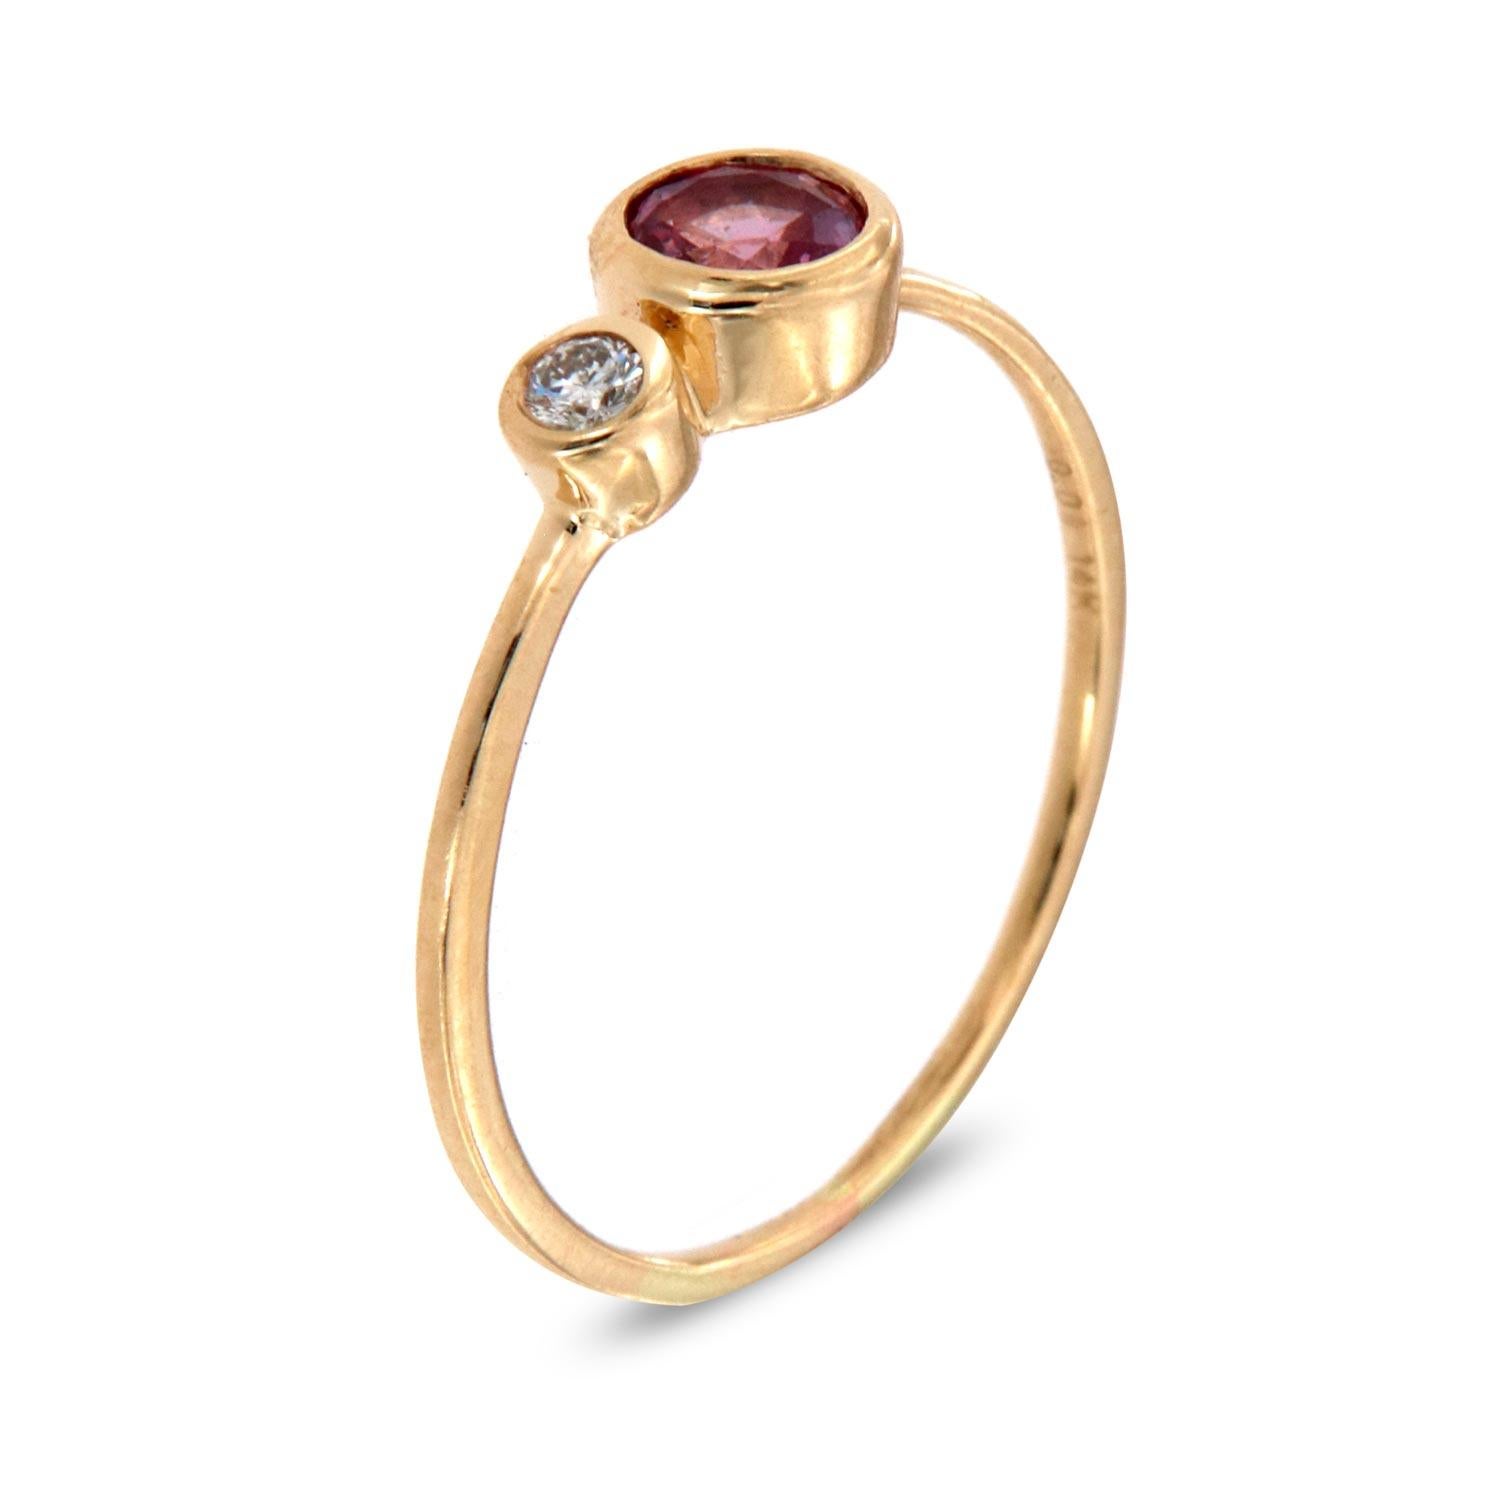 This petite fashion ring is impressive in its vintage appeal, featuring a bezeled natural pink round brilliant sapphire, accented with round brilliant diamond. Experience the difference in person!

Product details: 

Center Gemstone Type: